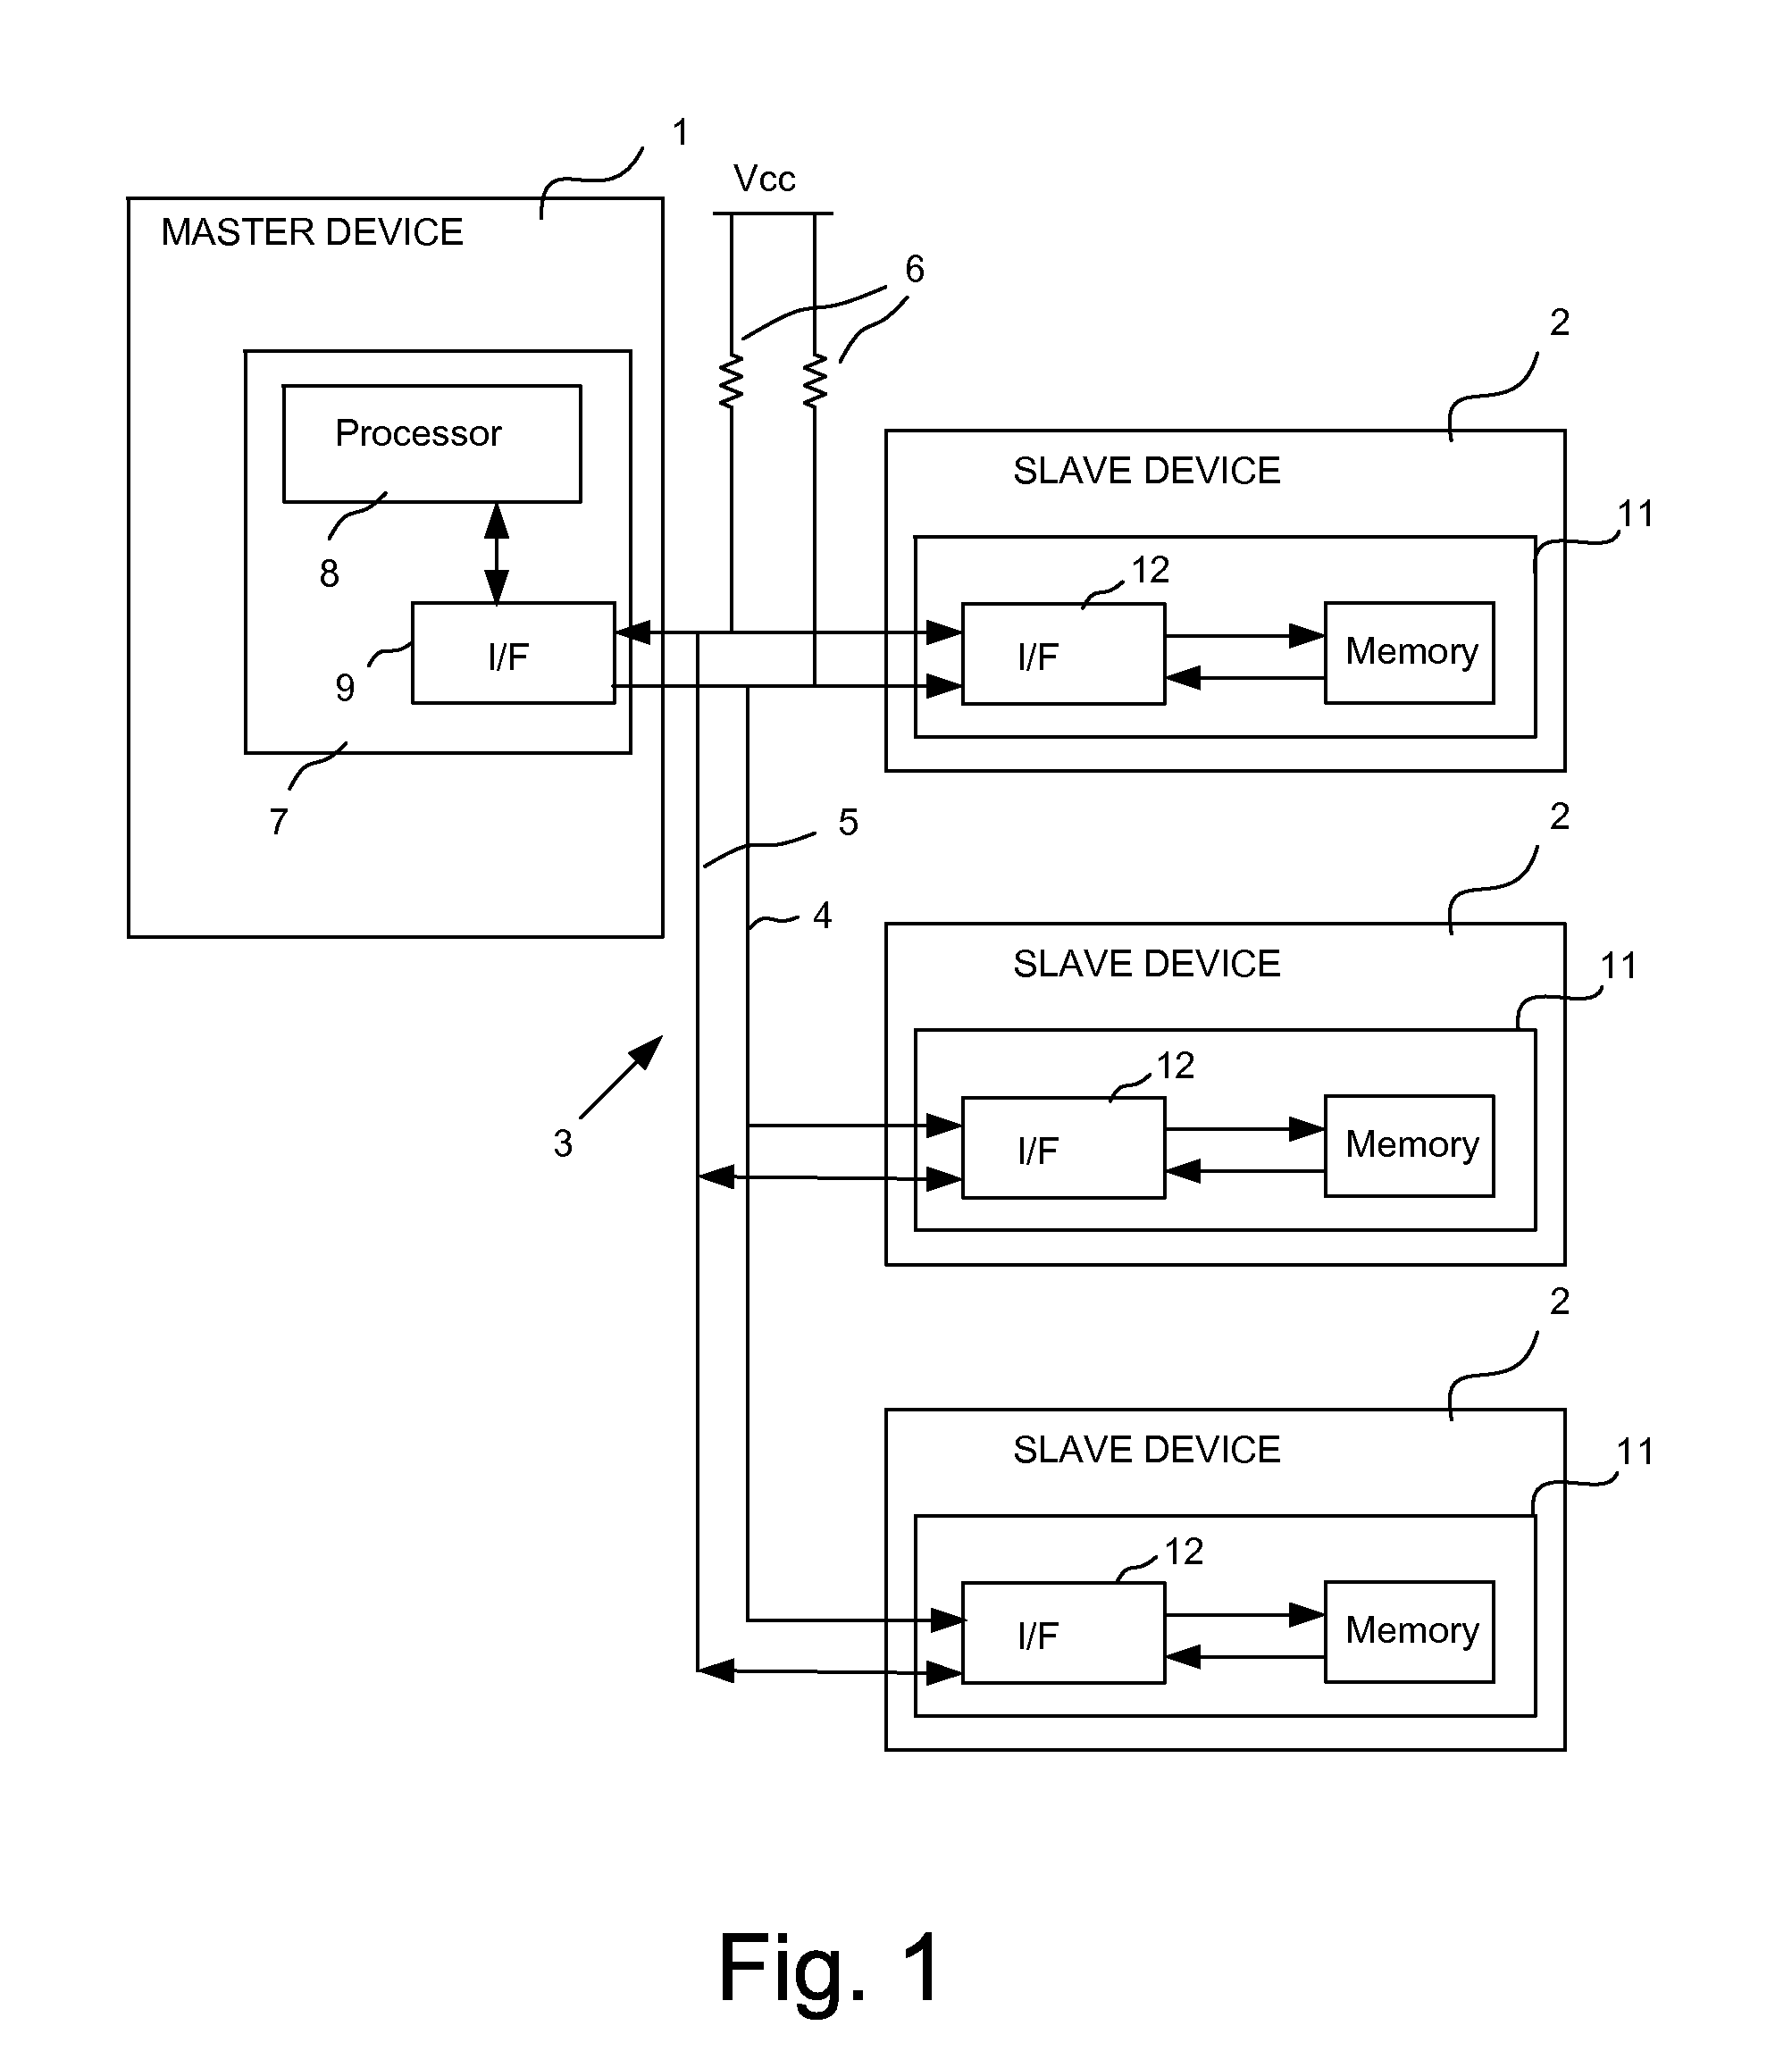 Apparatus and Method for Polling Addresses of One or More Slave Devices in a Communications System